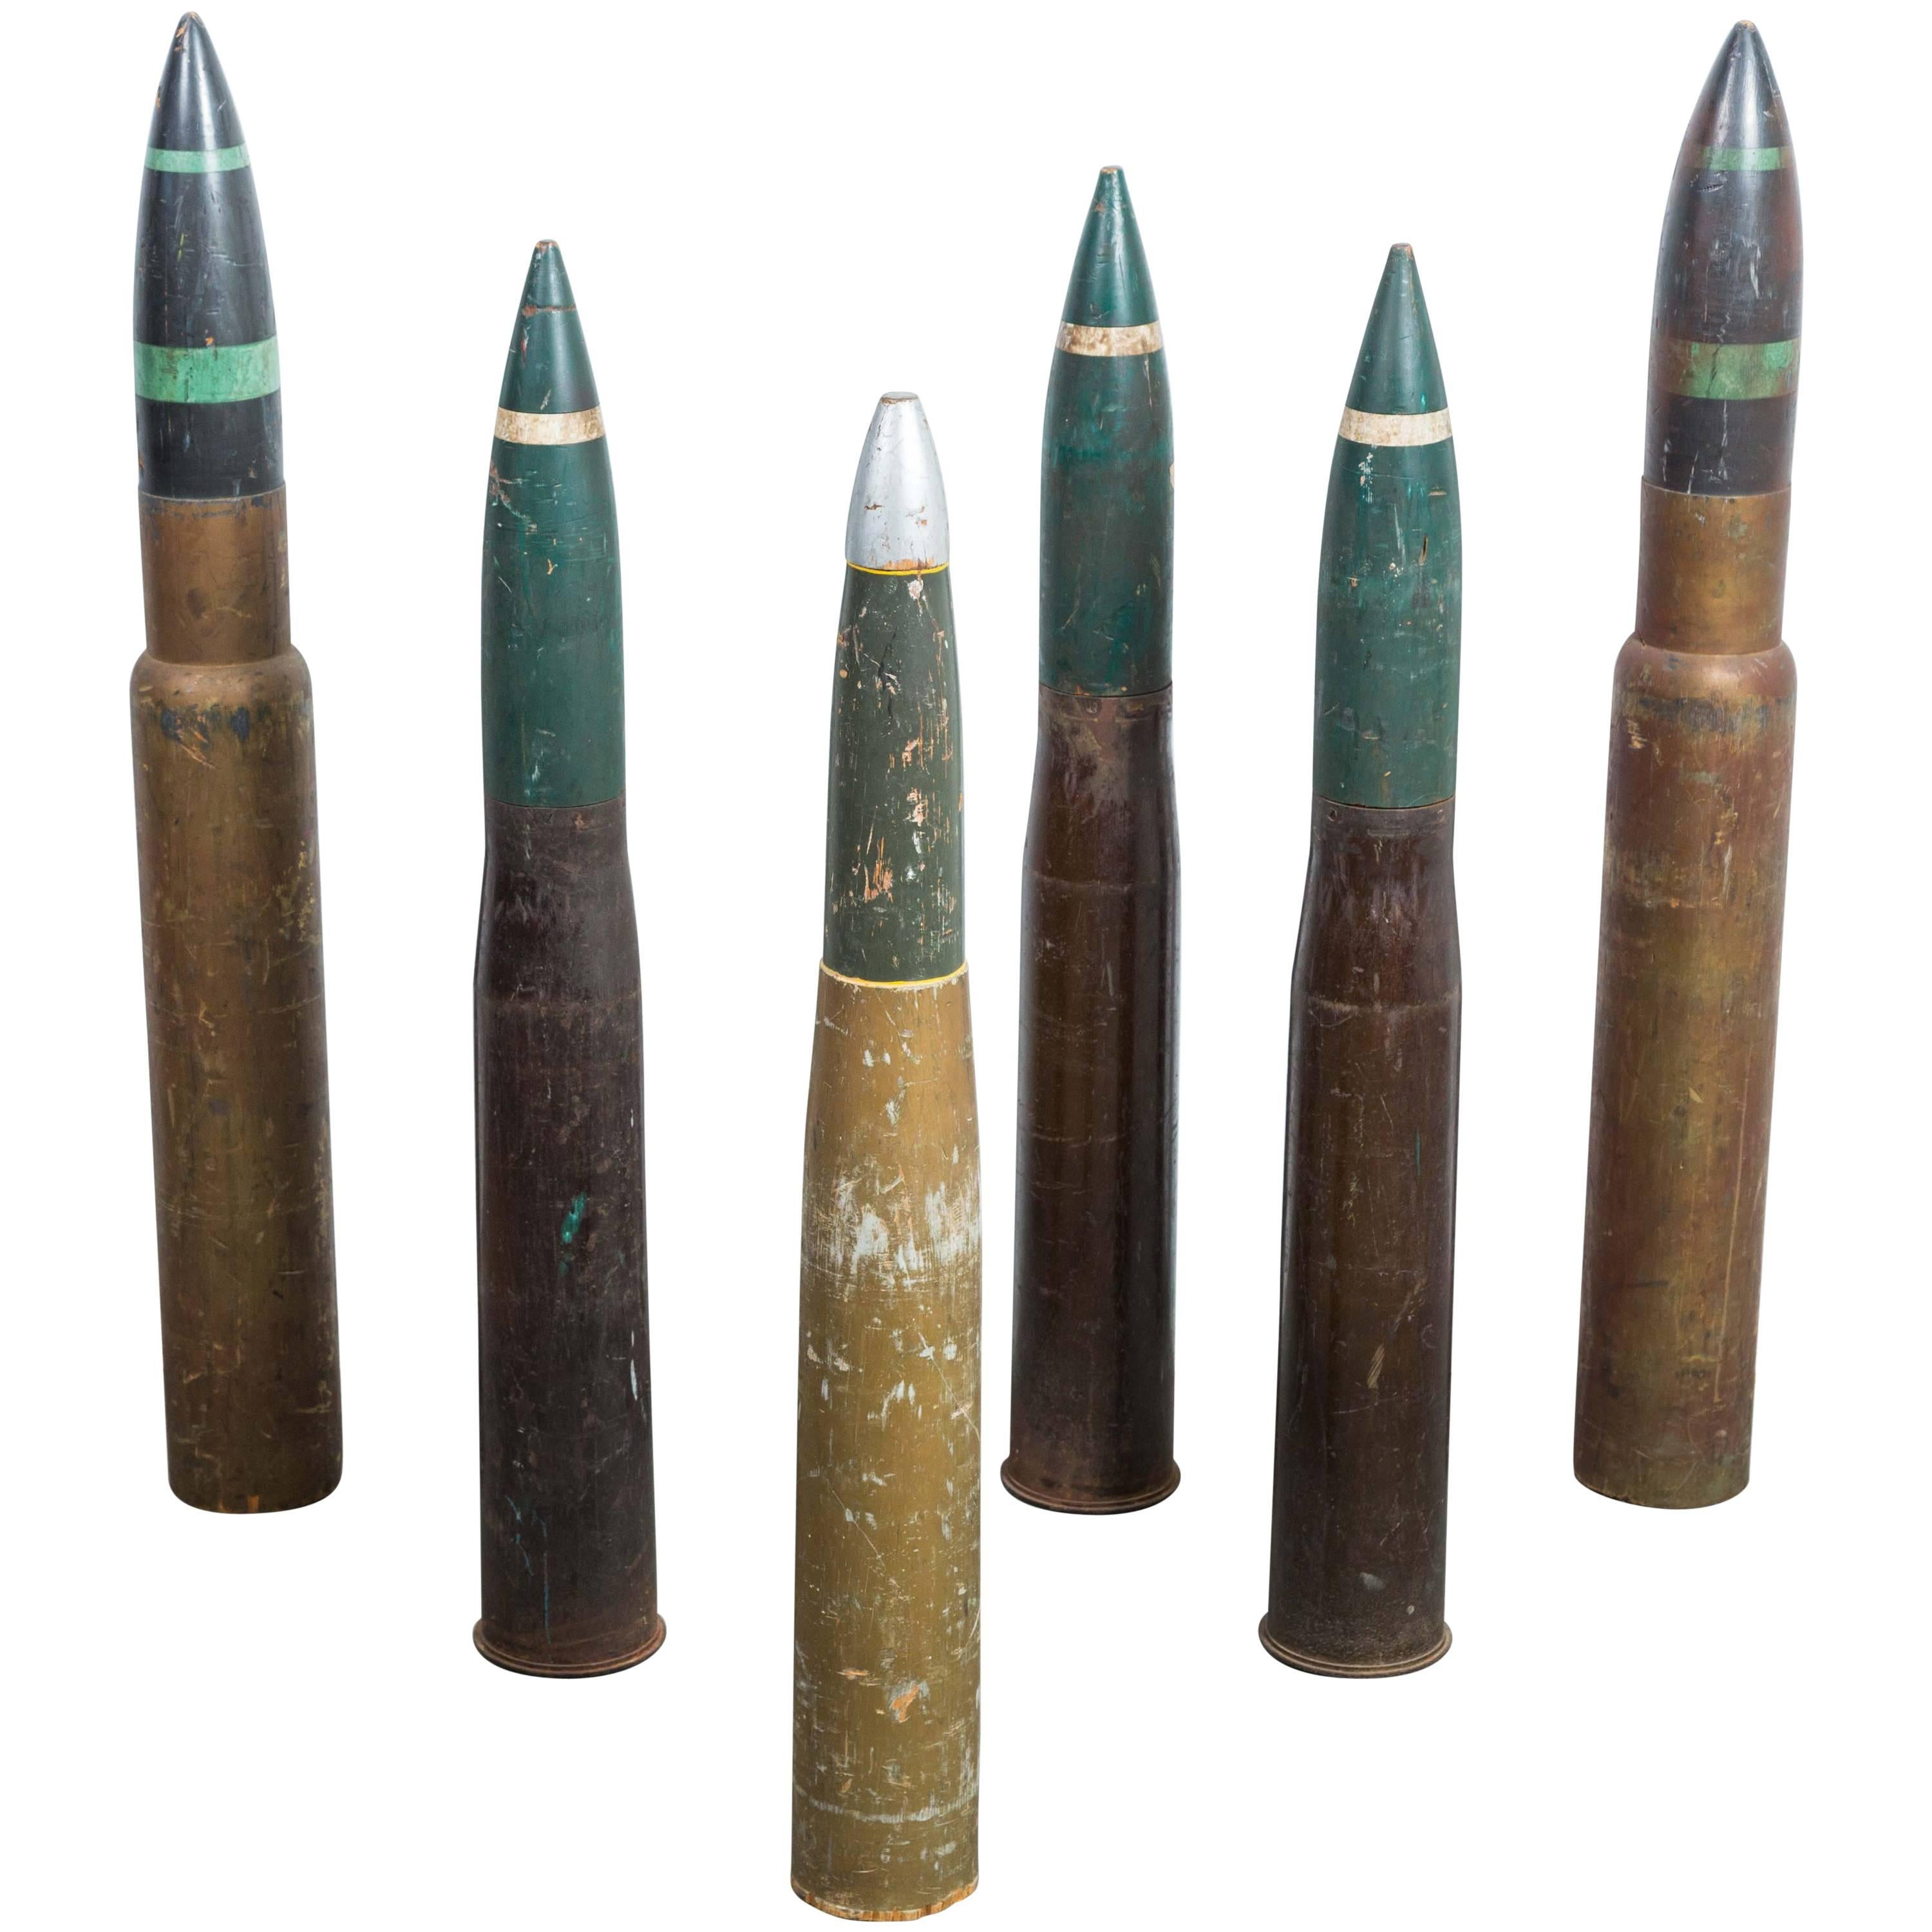 Collection of Vintage Hand-Painted Artillery Practice Shells